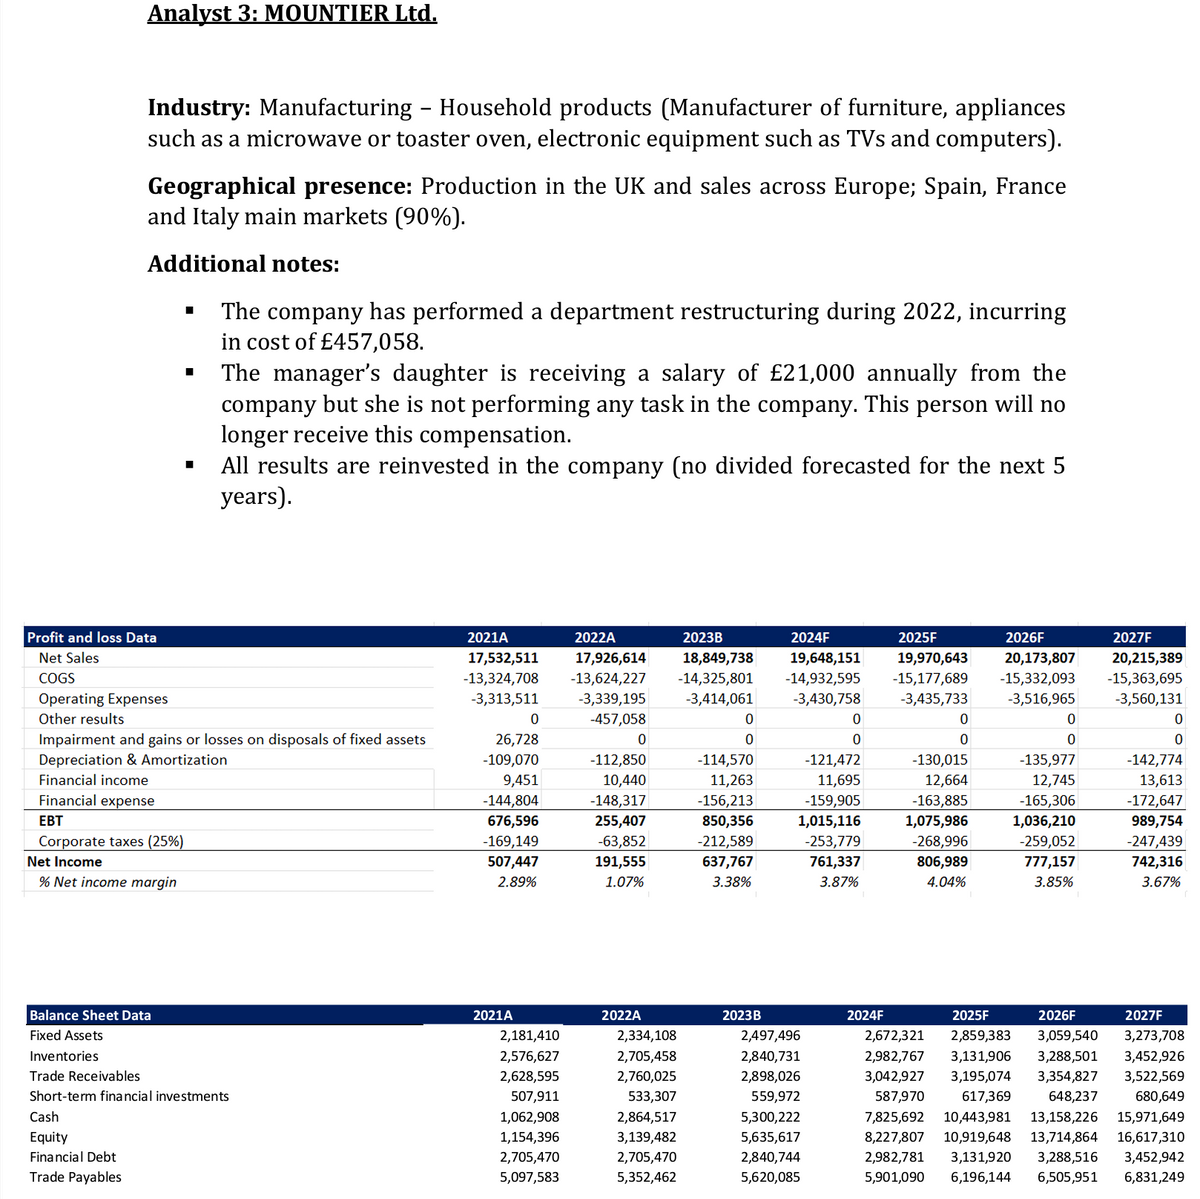 Analyst 3: MOUNTIER Ltd.
Industry: Manufacturing - Household products (Manufacturer of furniture, appliances
such as a microwave or toaster oven, electronic equipment such as TVs and computers).
Geographical presence: Production in the UK and sales across Europe; Spain, France
and Italy main markets (90%).
Additional notes:
Profit and loss Data
Net Sales
COGS
Operating Expenses
Other results
Corporate taxes (25%)
Net Income
% Net income margin
Cash
Equity
Financial Debt
Trade Payables
Impairment and gains or losses on disposals of fixed assets
Depreciation & Amortization
Financial income
Financial expense
EBT
Balance Sheet Data
Fixed Assets
The company has performed a department restructuring during 2022, incurring
in cost of £457,058.
The manager's daughter is receiving a salary of £21,000 annually from the
company but she is not performing any task in the company. This person will no
longer receive this compensation.
All results are reinvested in the company (no divided forecasted for the next 5
years).
Inventories
Trade Receivables
Short-term financial investments
2026F
2021A
2022A
2023B
2024F
2025F
17,532,511 17,926,614 18,849,738 19,648,151 19,970,643 20,173,807
-13,324,708 -13,624,227 -14,325,801 -14,932,595 -15,177,689 -15,332,093
-3,313,511 -3,339,195 -3,414,061 -3,430,758 -3,435,733 -3,516,965
-457,058
0
-112,850
10,440
-148,317
255,407
-63,852
191,555
1.07%
0
26,728
-109,070
9,451
-144,804
676,596
-169,149
507,447
2.89%
2021A
2,181,410
2,576,627
2,628,595
507,911
1,062,908
1,154,396
2,705,470
5,097,583
2022A
2,334,108
2,705,458
2,760,025
533,307
2,864,517
3,139,482
2,705,470
5,352,462
0
0
-114,570
11,263
-156,213
850,356
-212,589
637,767
3.38%
0
0
-121,472
11,695
-159,905
1,015,116
-253,779
761,337
3.87%
2023 B
2,497,496
2,840,731
2,898,026
559,972
5,300,222
5,635,617
2,840,744
5,620,085
0
0
2024F
-130,015
12,664
-163,885
1,075,986
-268,996
806,989
4.04%
0
0
-135,977
12,745
-165,306
1,036,210
-259,052
777,157
3.85%
2027F
20,215,389
-15,363,695
-3,560,131
0
0
-142,774
13,613
-172,647
989,754
-247,439
742,316
3.67%
2025F
2026F
2027F
2,672,321 2,859,383
3,059,540
3,273,708
2,982,767 3,131,906 3,288,501
3,452,926
3,522,569
3,042,927 3,195,074 3,354,827
587,970 617,369
648,237 680,649
7,825,692 10,443,981 13,158,226 15,971,649
8,227,807 10,919,648 13,714,864 16,617,310
2,982,781 3,131,920 3,288,516 3,452,942
5,901,090 6,196,144 6,505,951 6,831,249